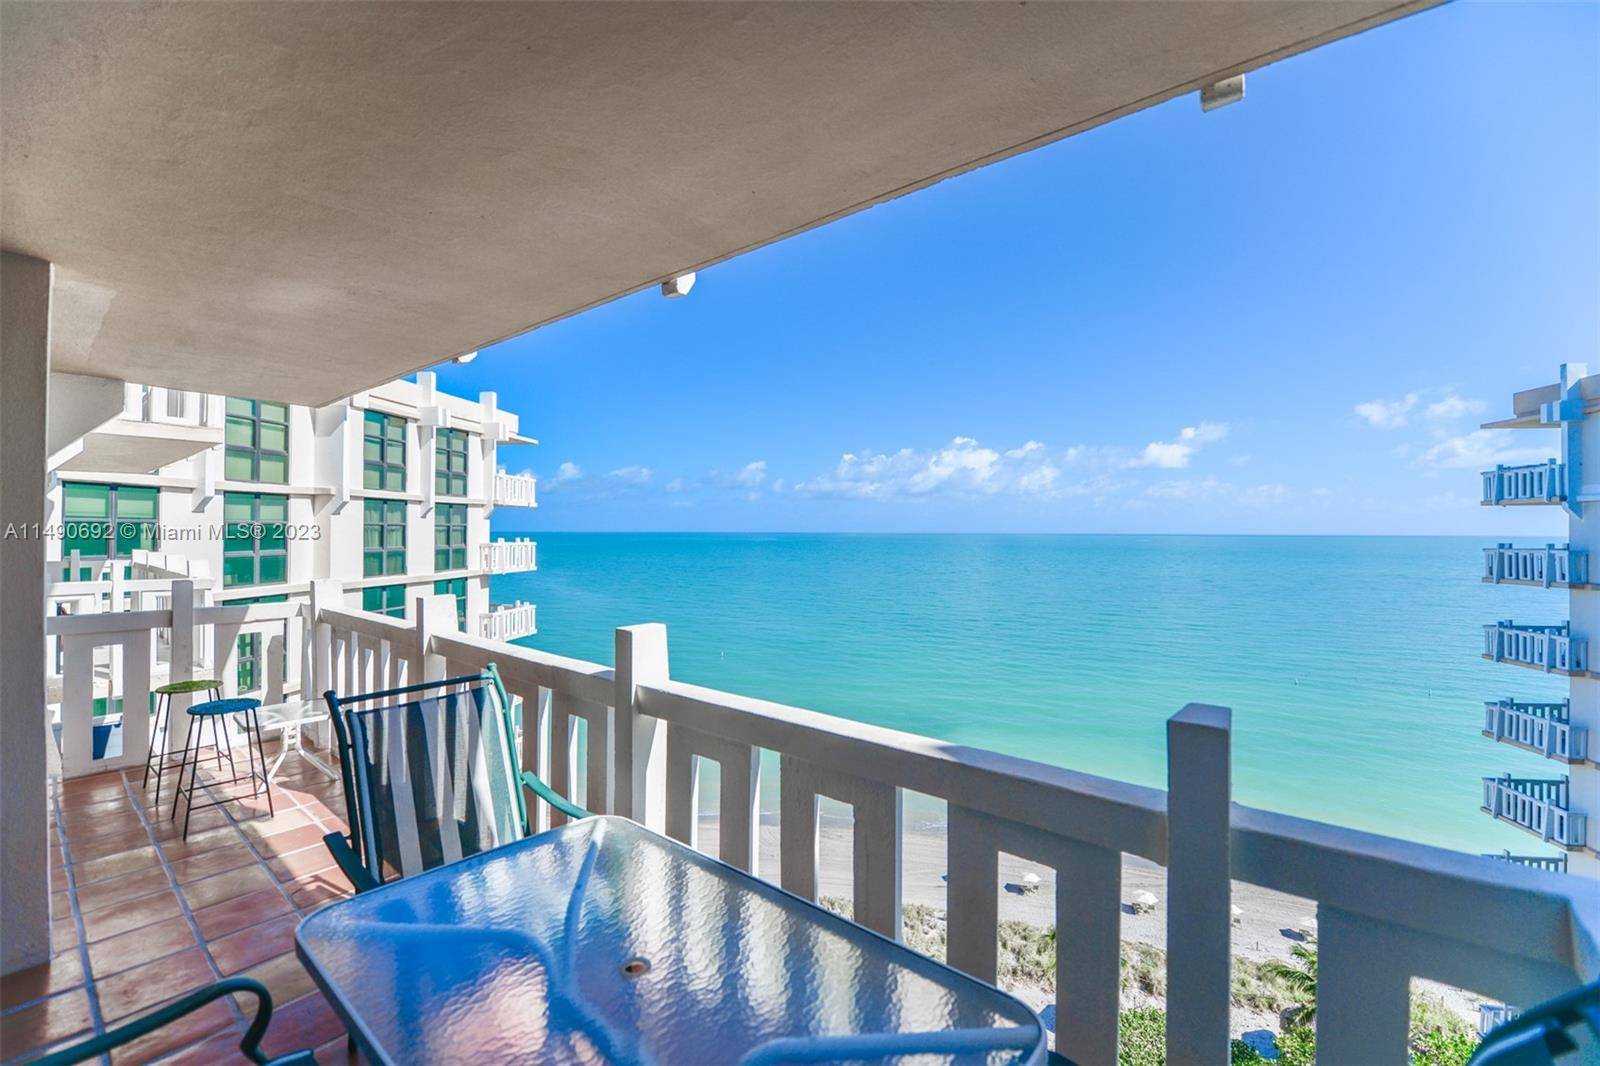 A luxurious lifestyle awaits you in one of the most desirable buildings of Key Biscayne.